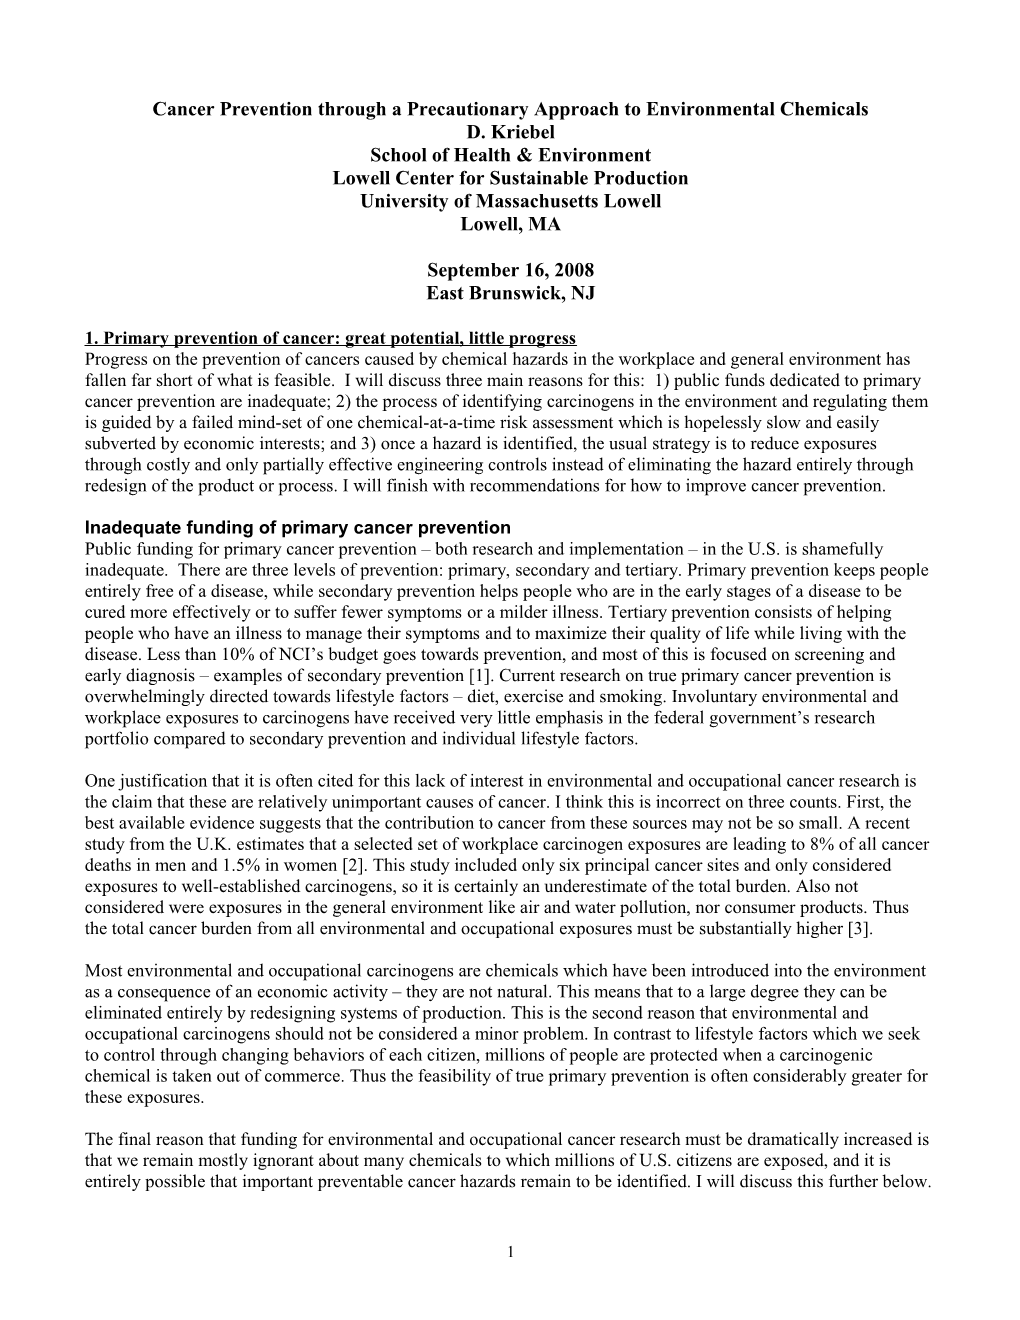 Paper for Pisa Meeting on Cancer Prevention Feb 2003